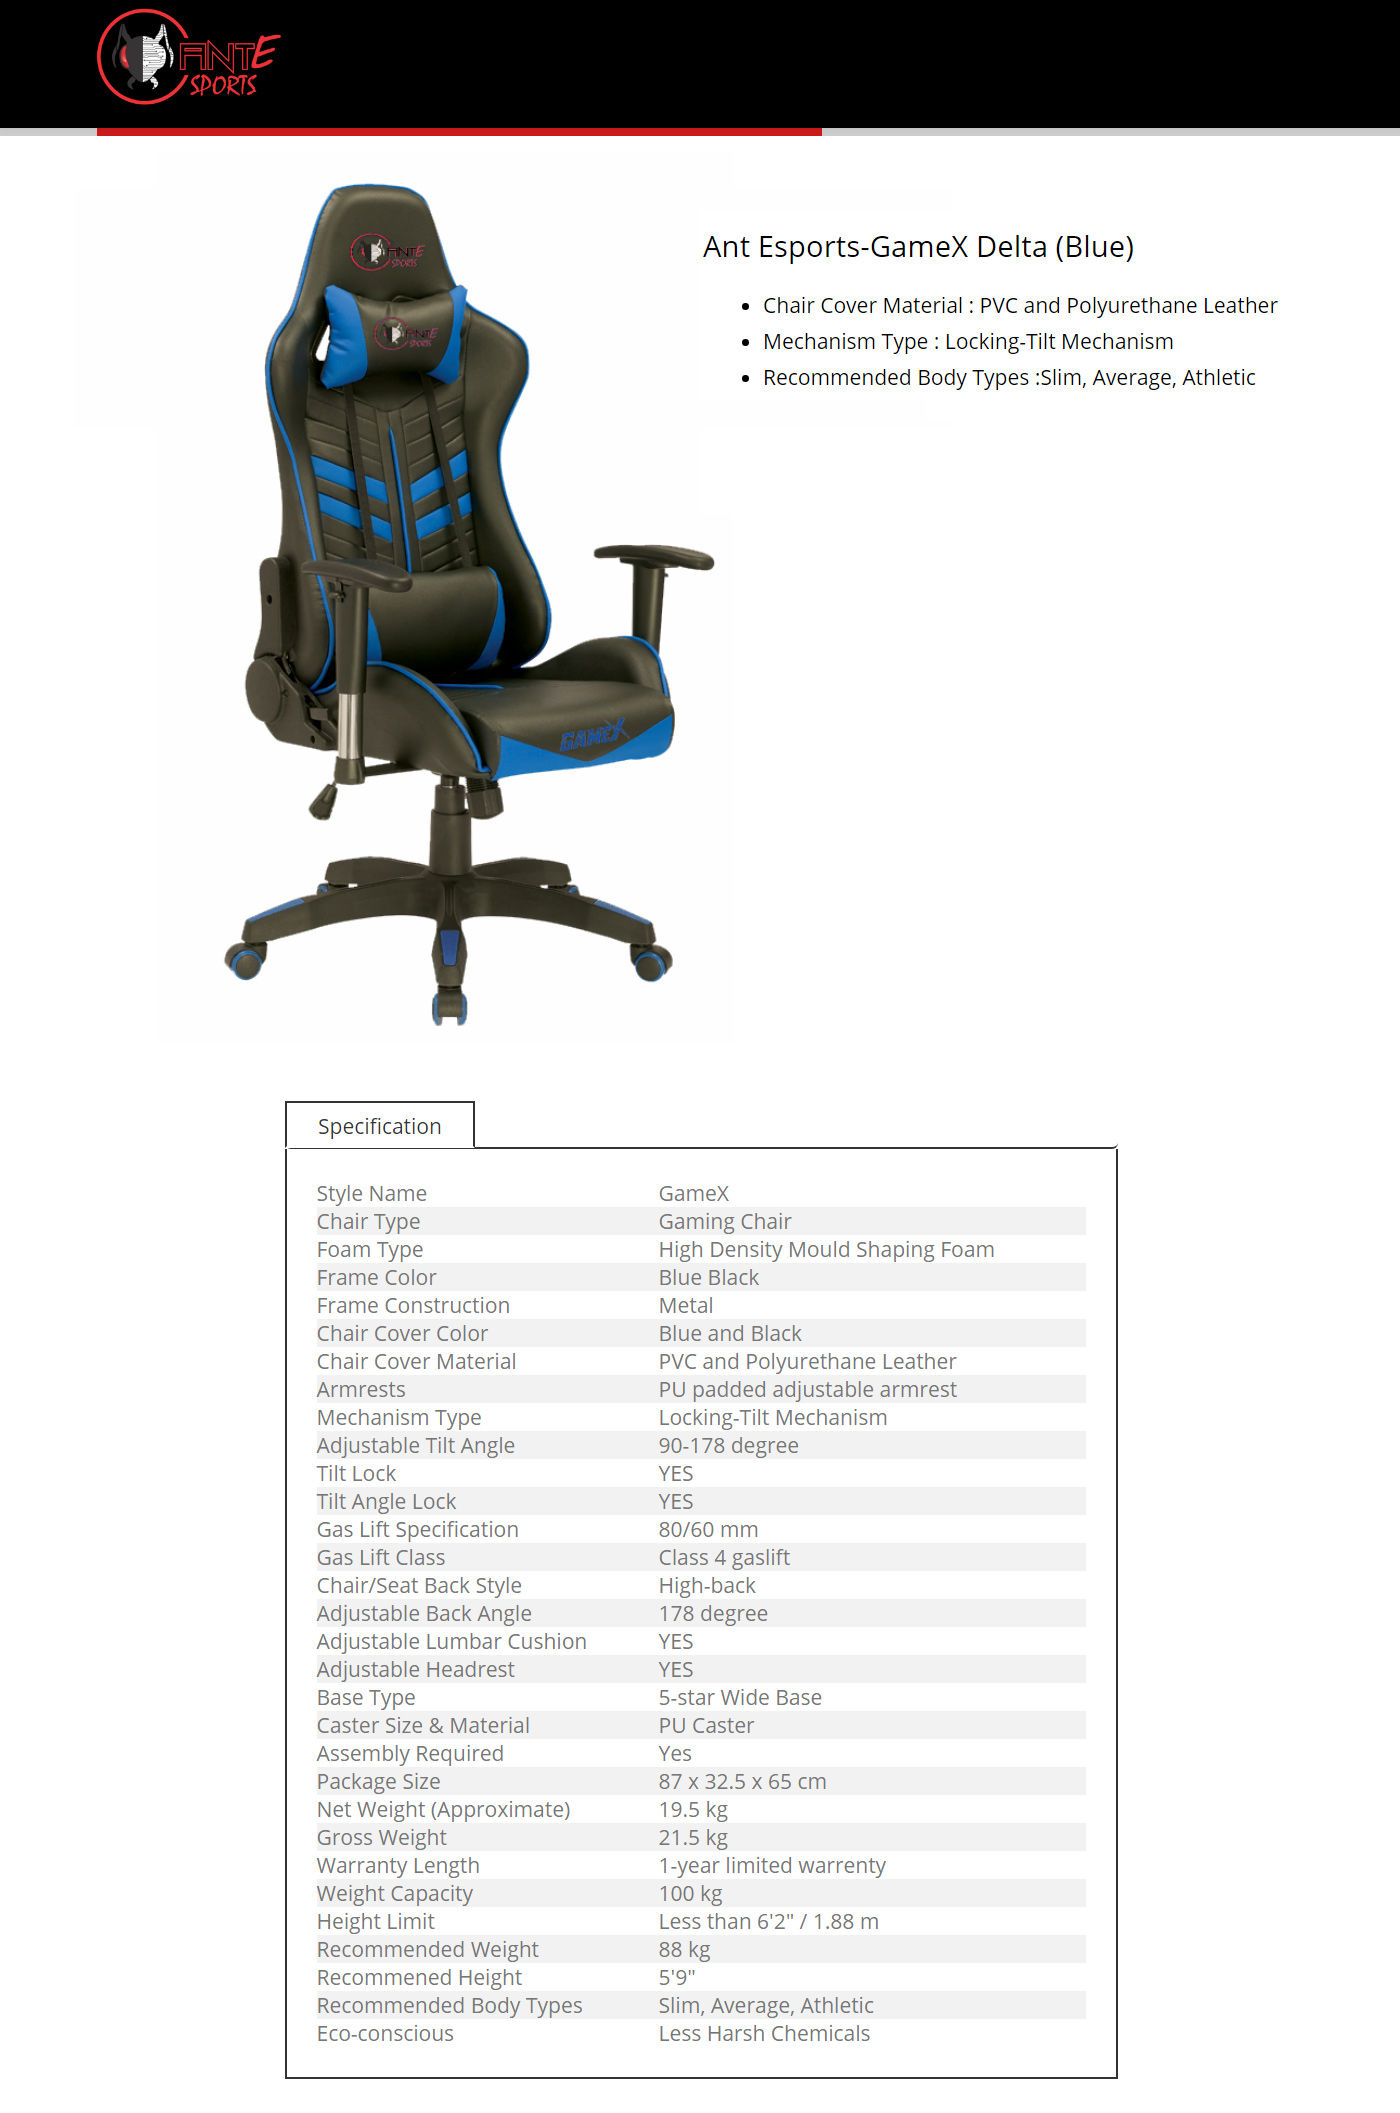  Buy OnlineAnt Esports GameX Delta Gaming Chair - Blue